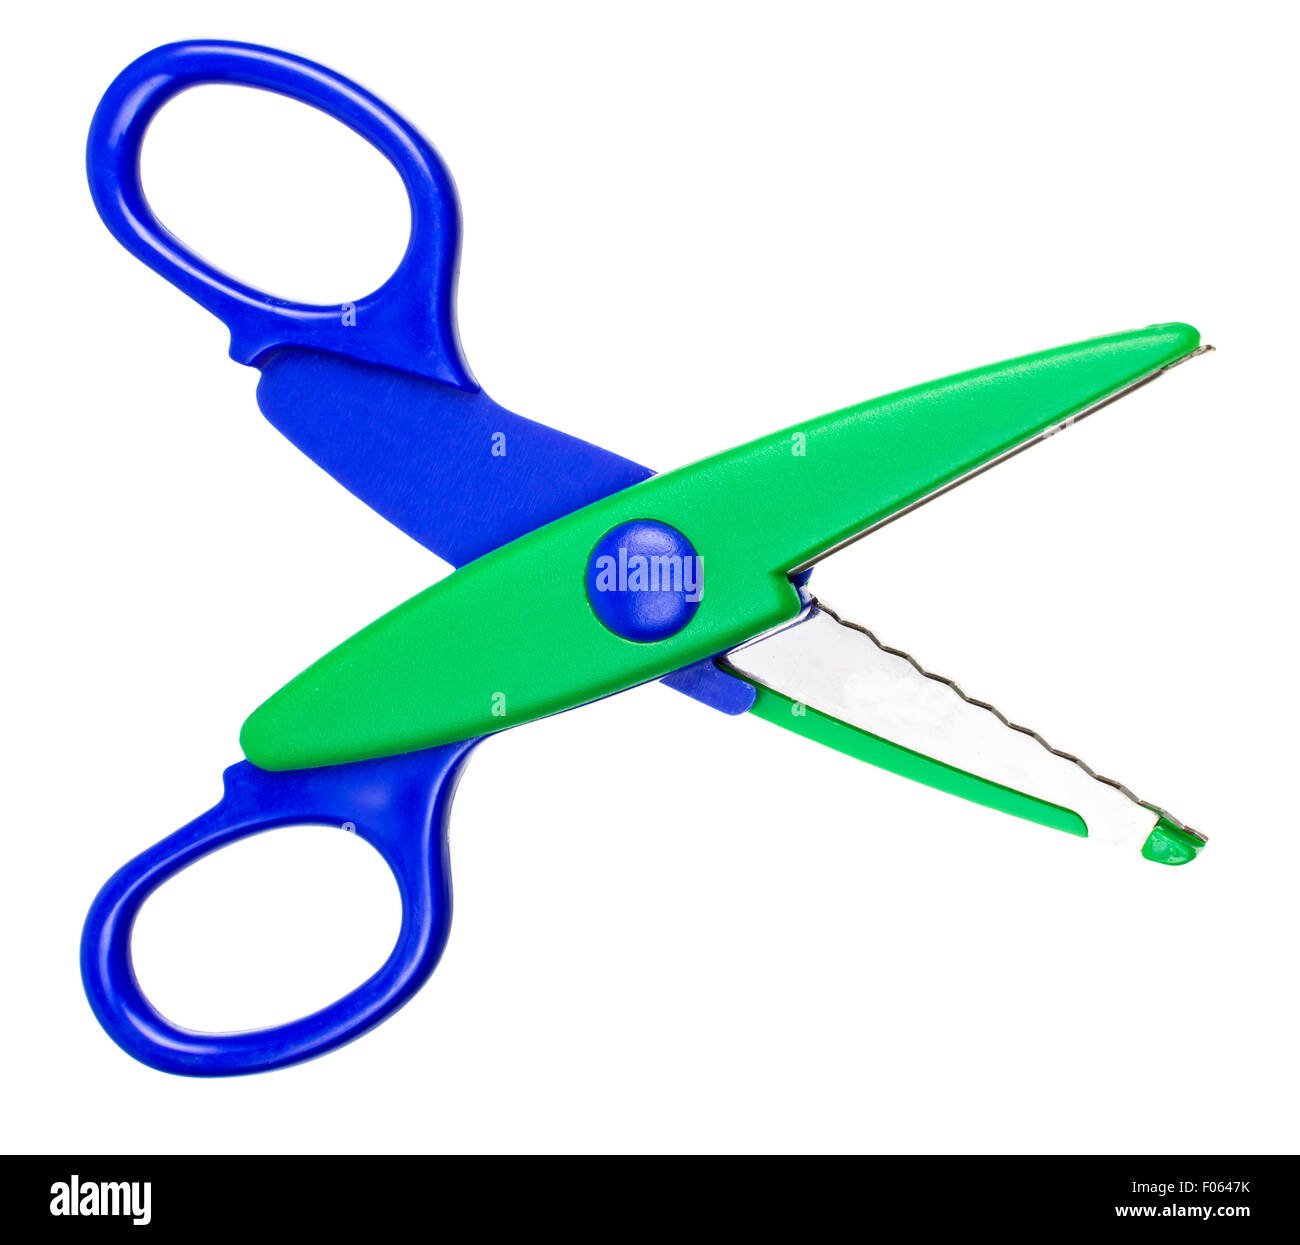 Child scissors Cut Out Stock Images & Pictures - Page 2 - Alamy